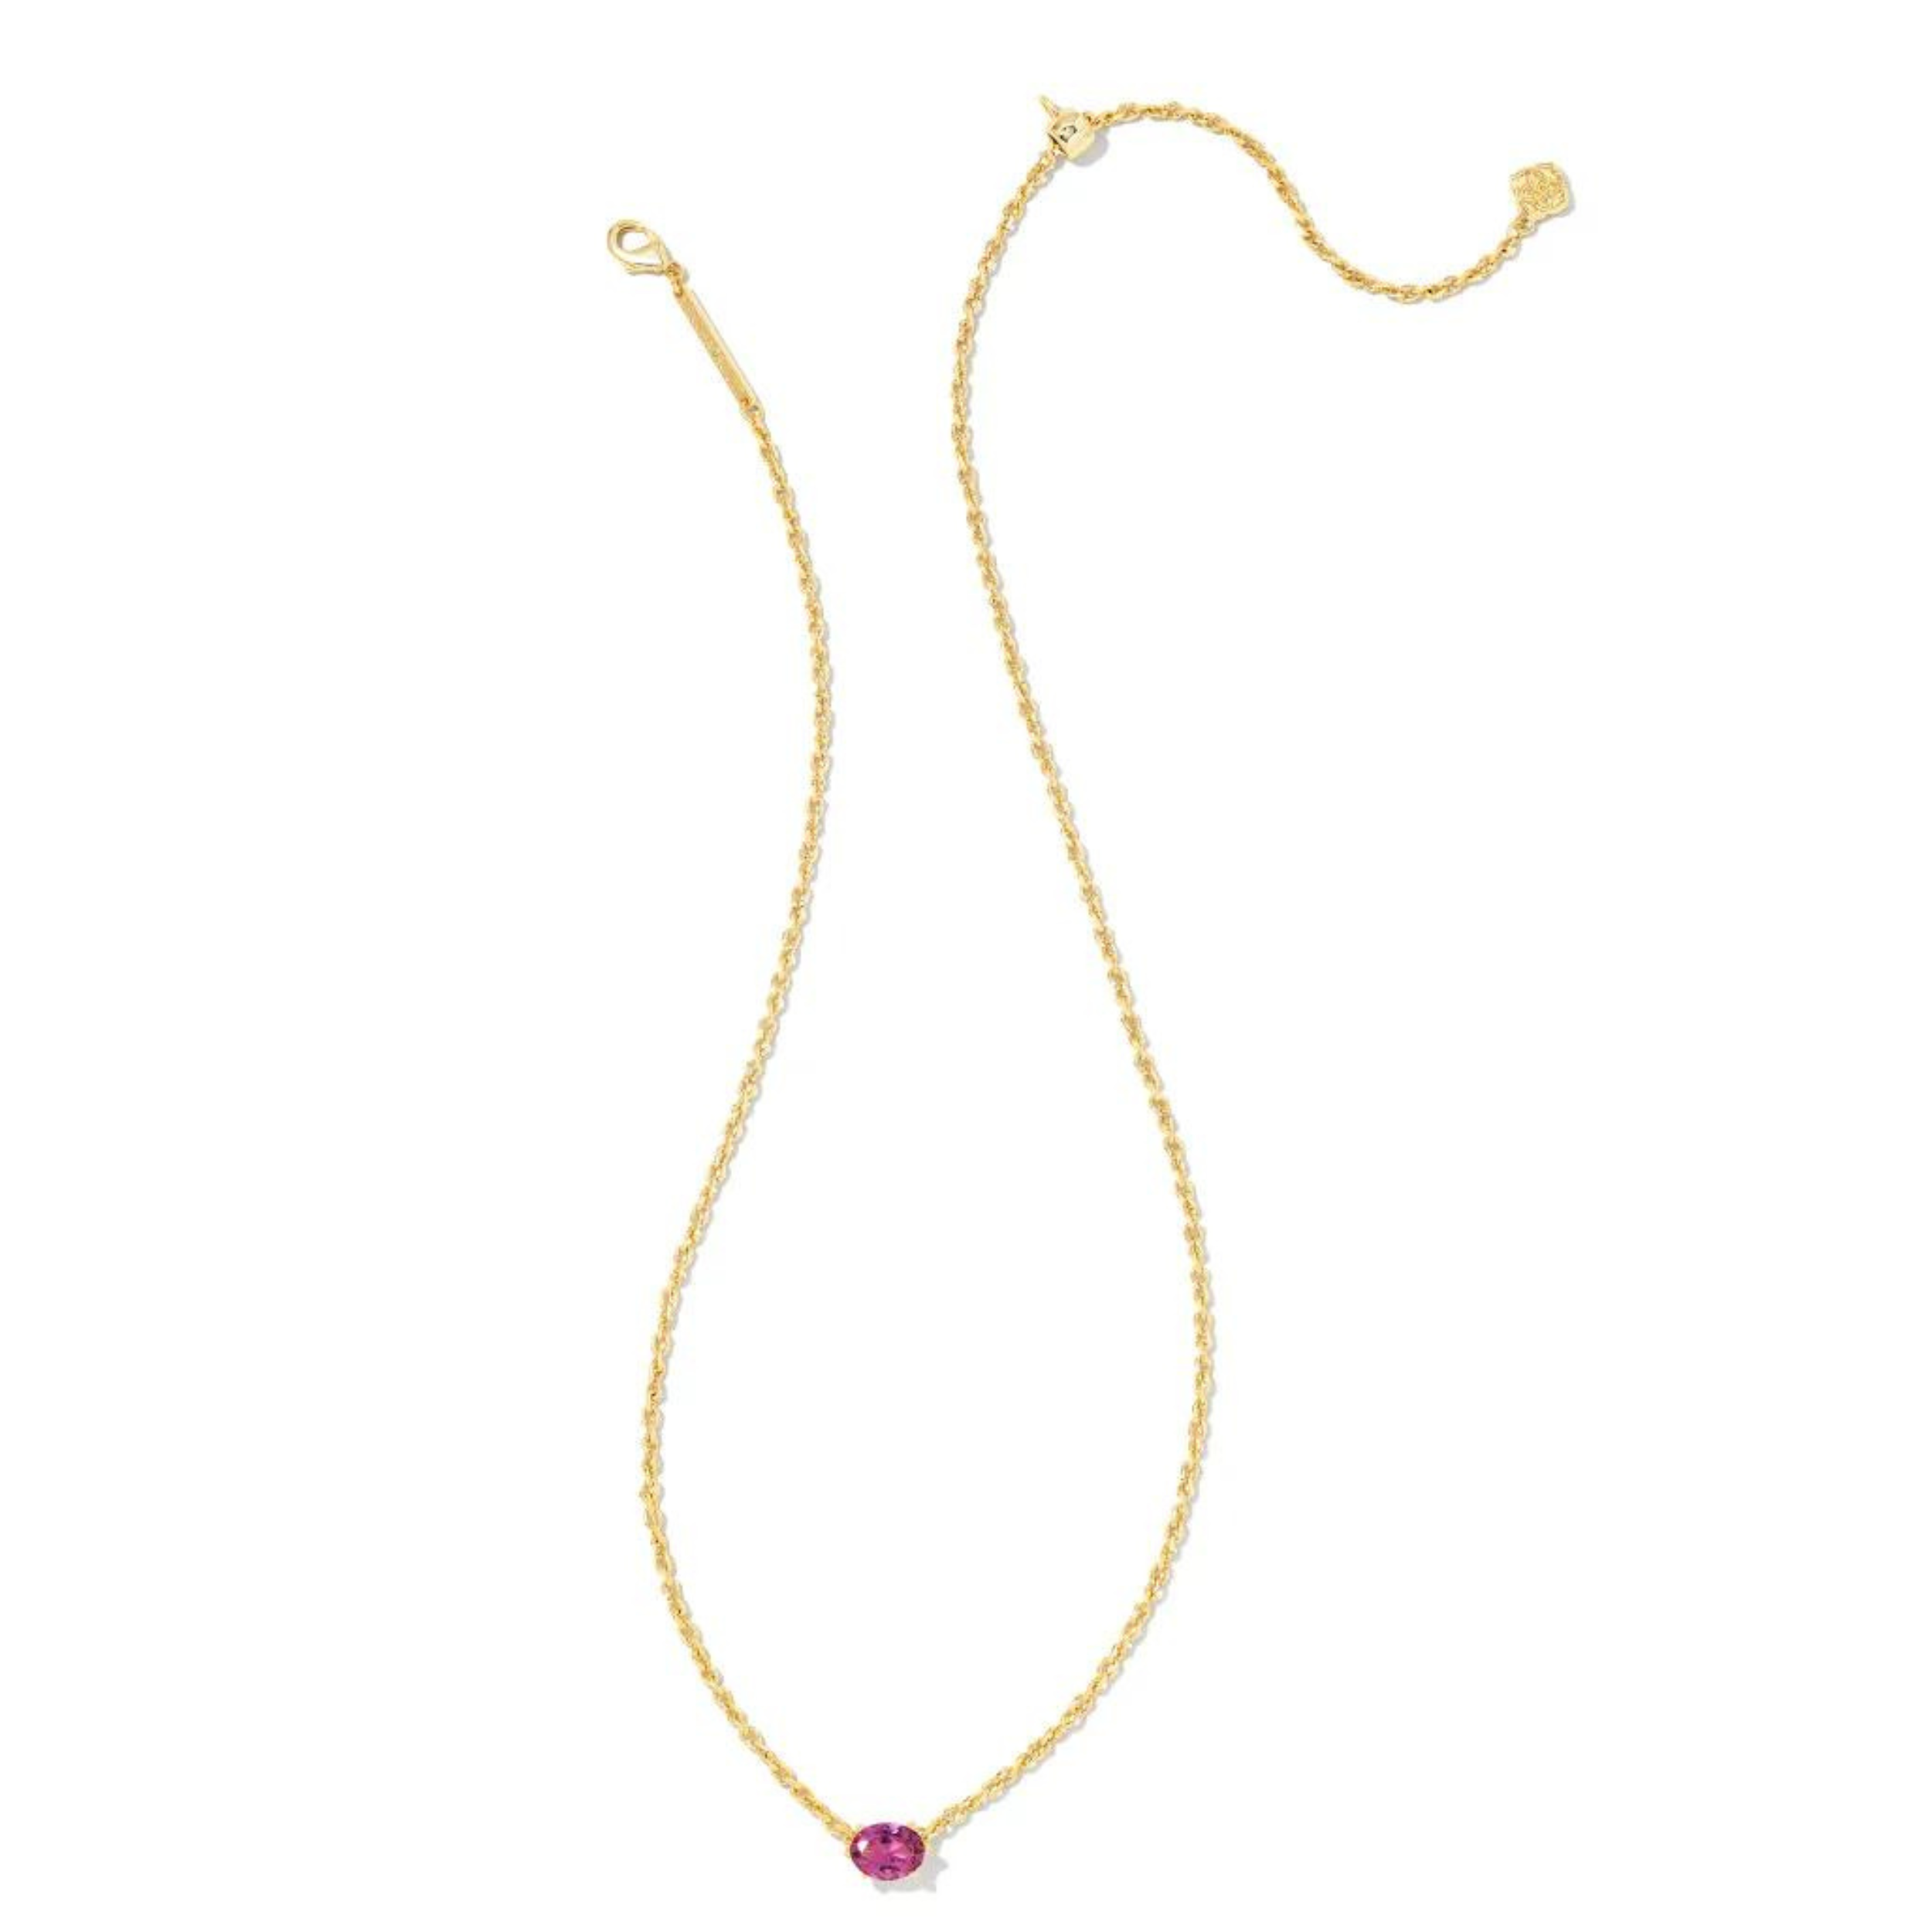 Kendra Scott | Cailin Gold Pendant Necklace in Purple Crystal - Giddy Up Glamour Boutique